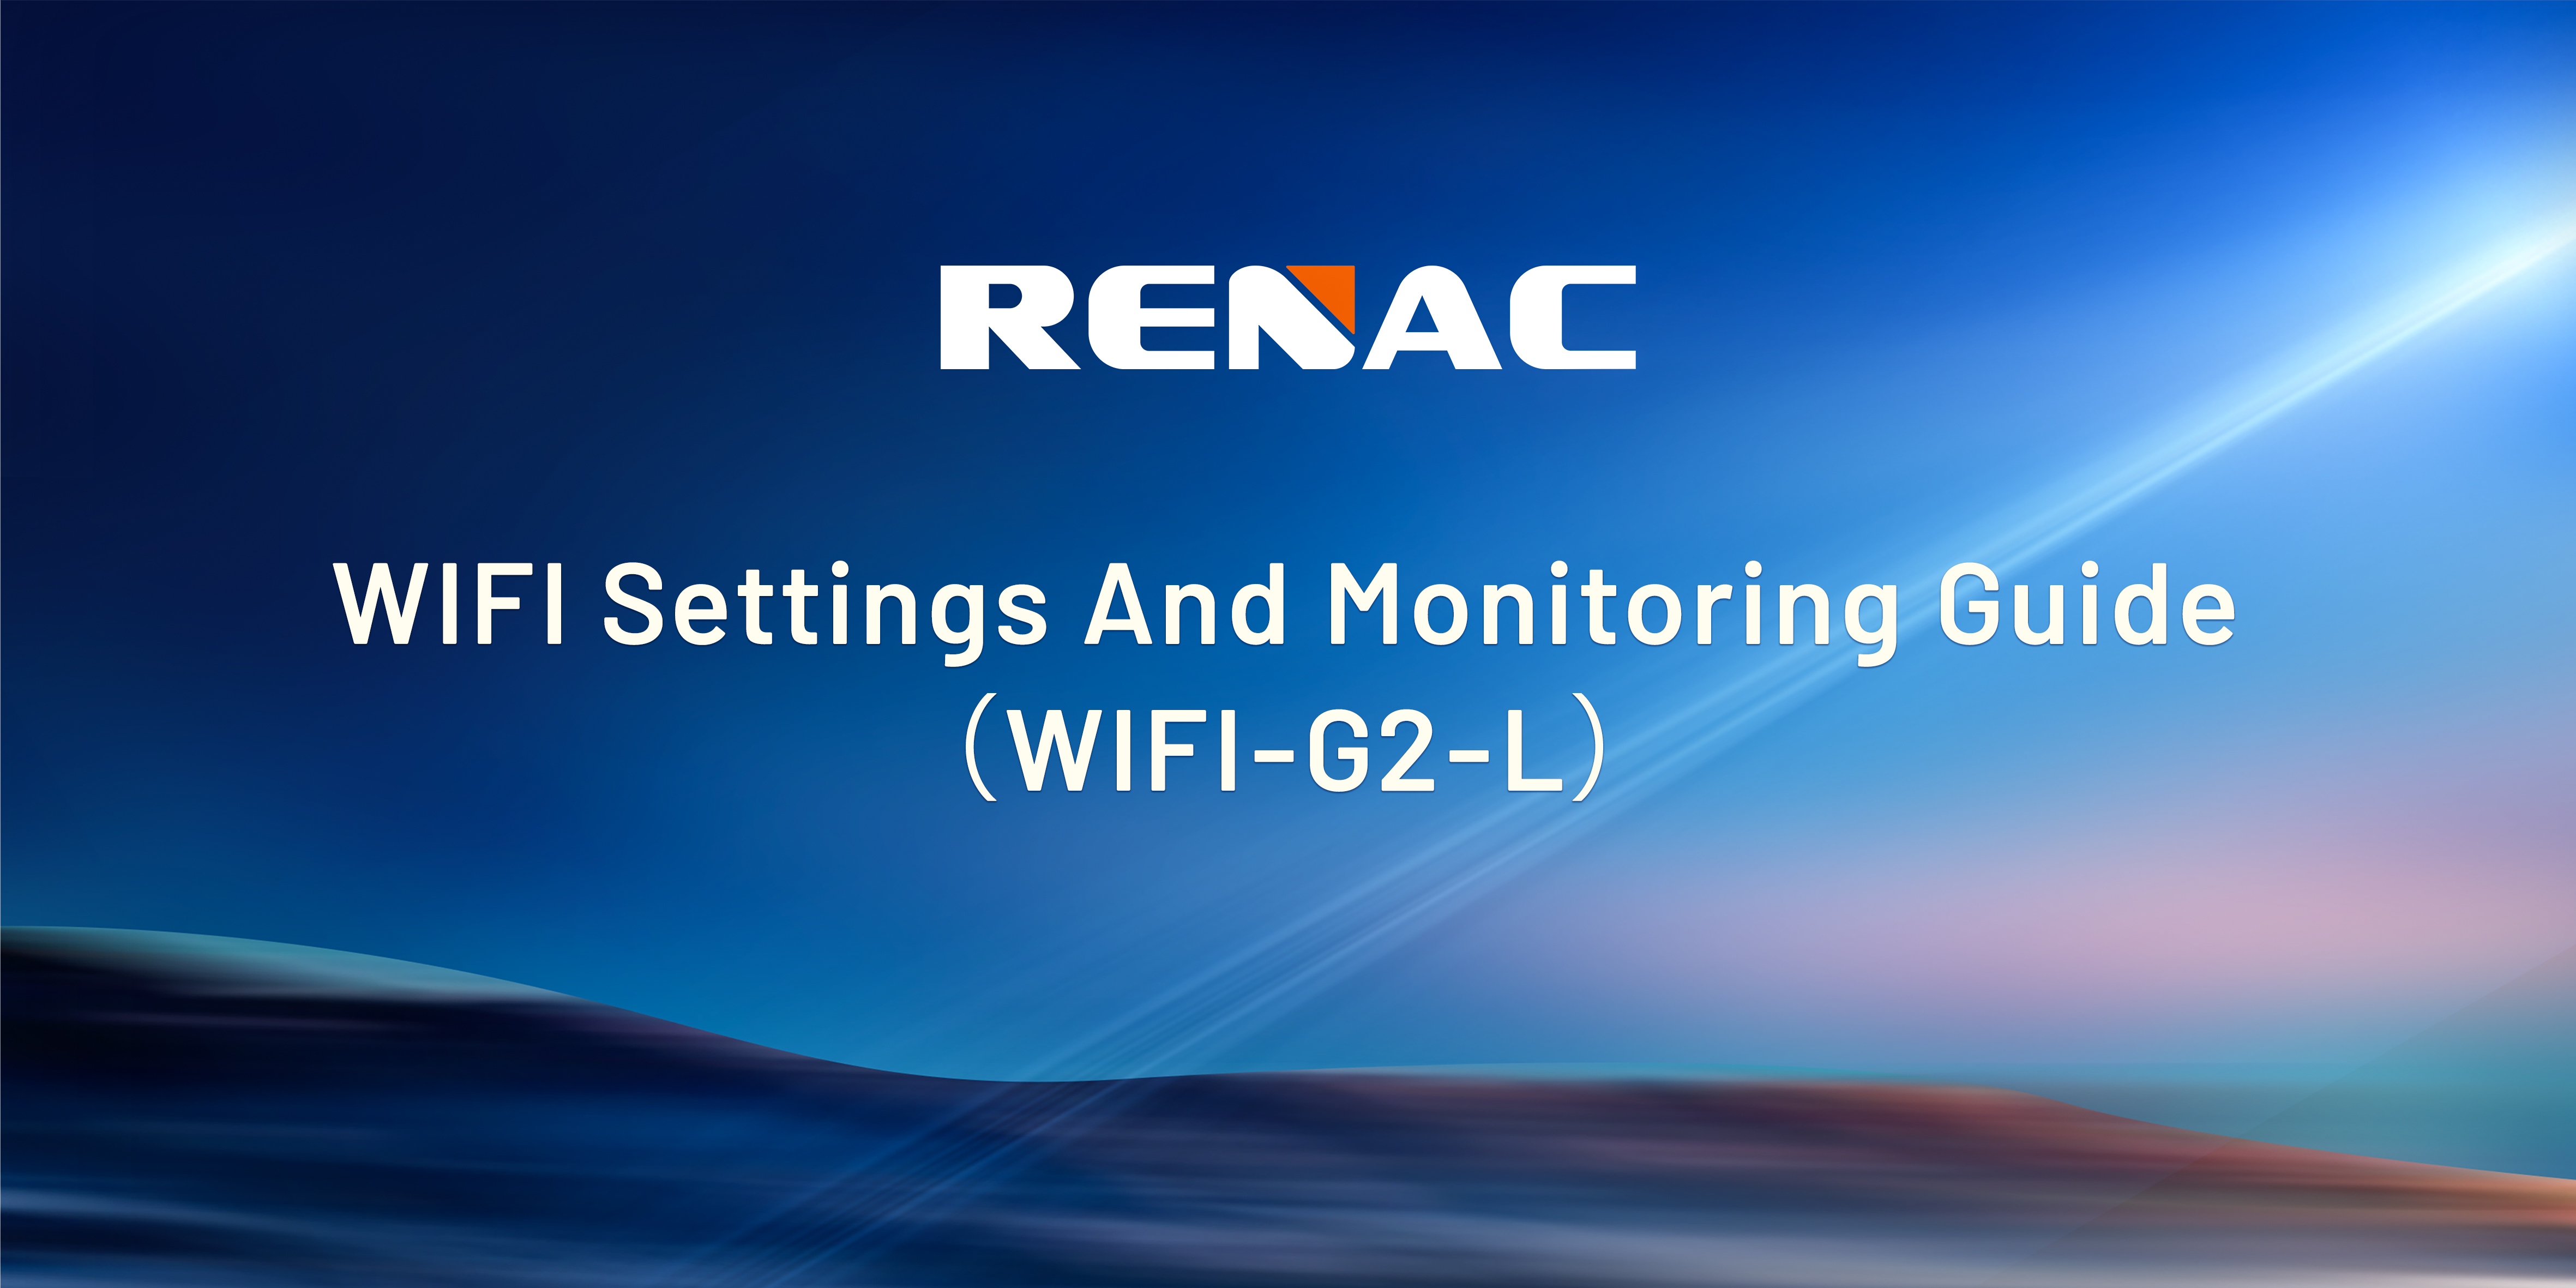 WIFI Settings And Monitoring Guide（WIFI-G2-L）